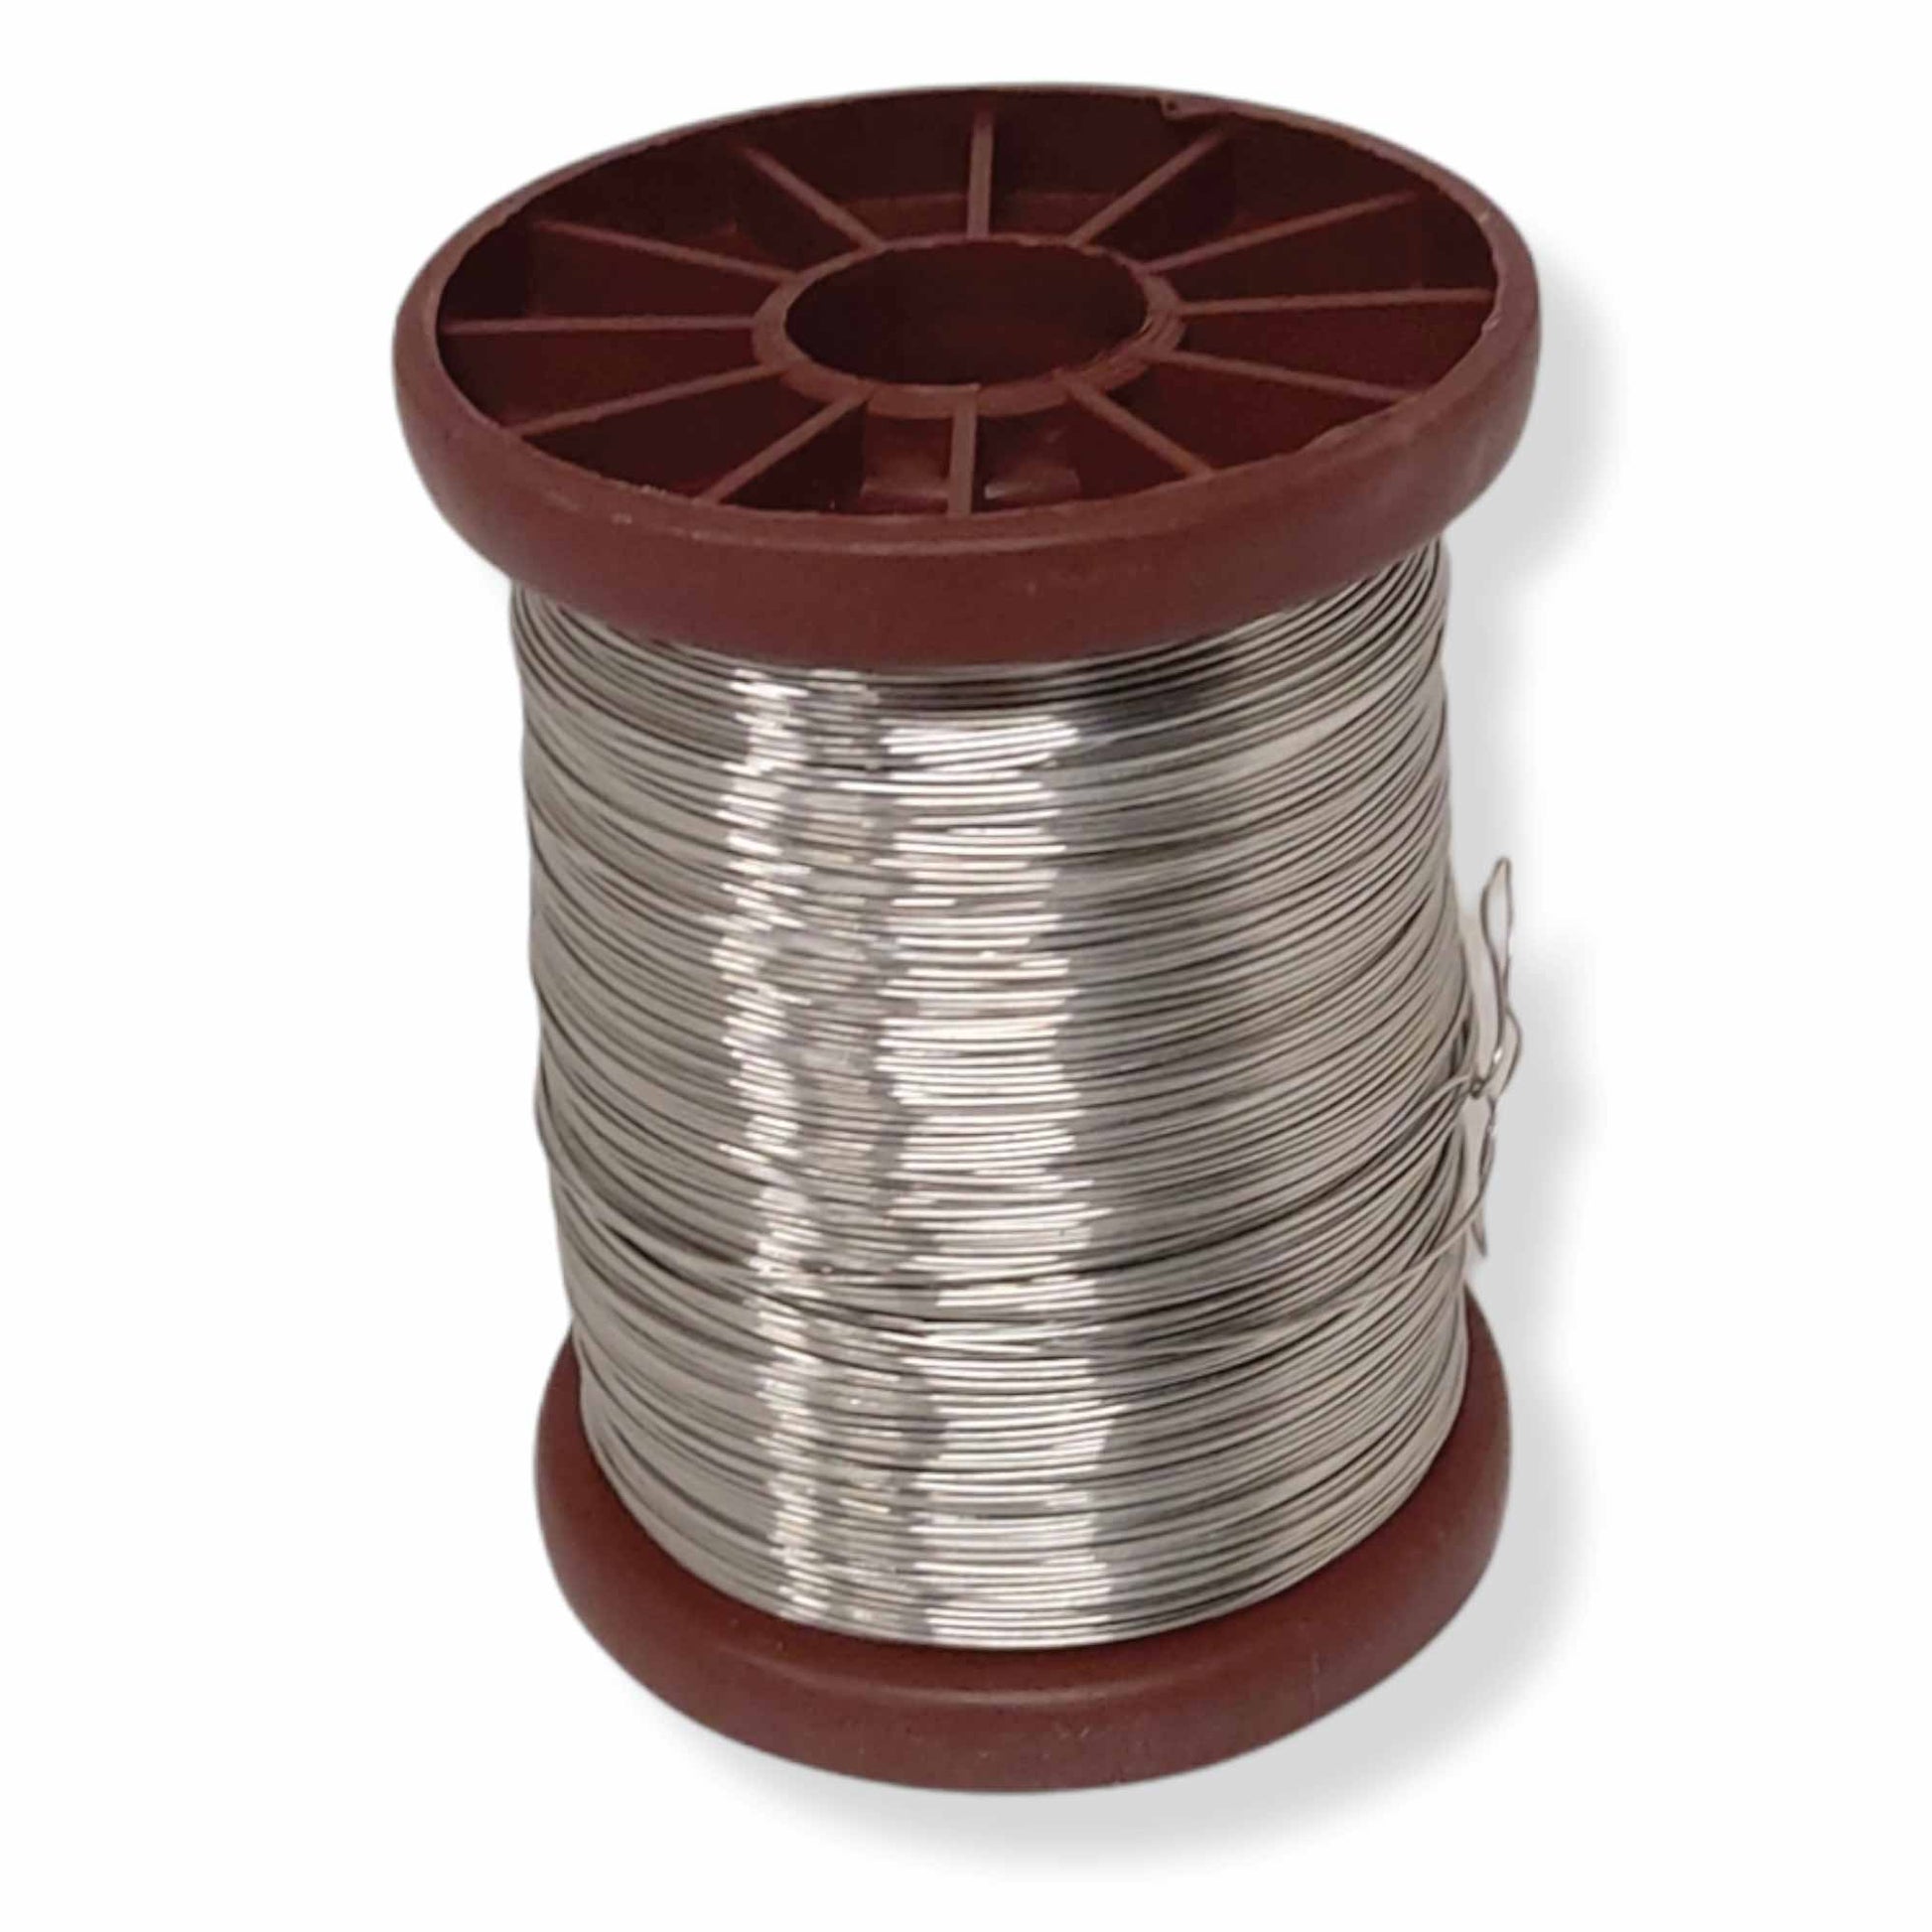 500g Bee Frame Wire 304 Stainless Steel Hive Wax Foundation 600m Roll Beekeeping